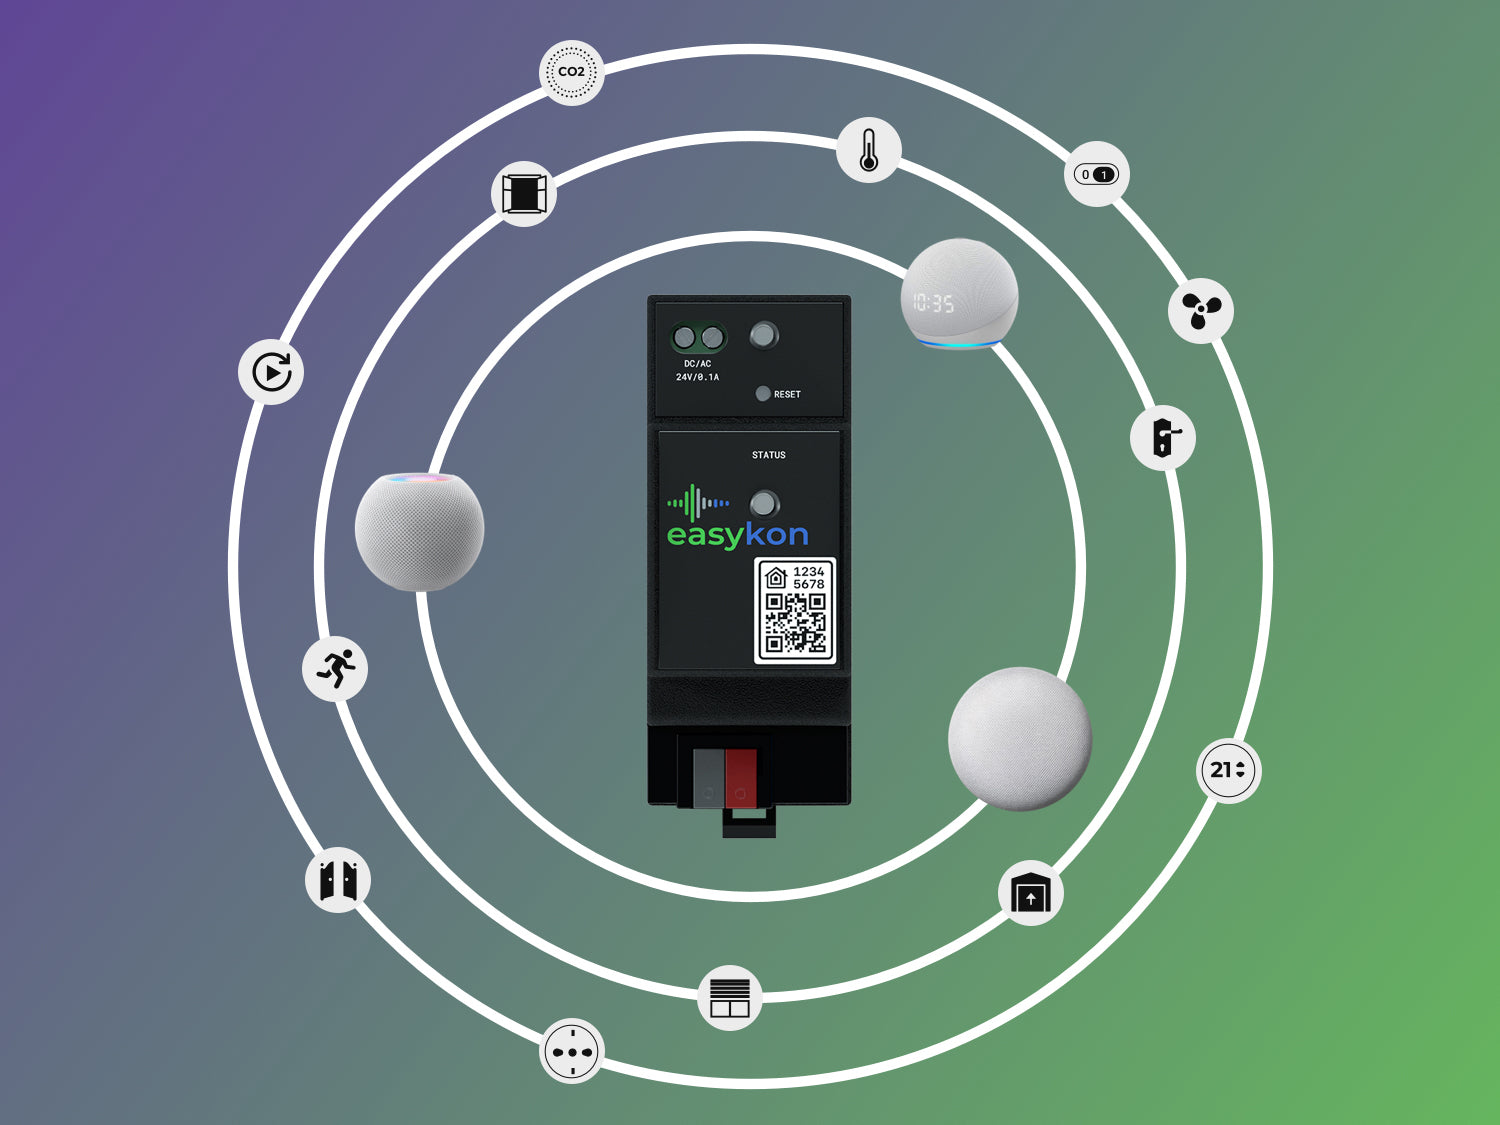 easykon bridge to get voice control for knx home system